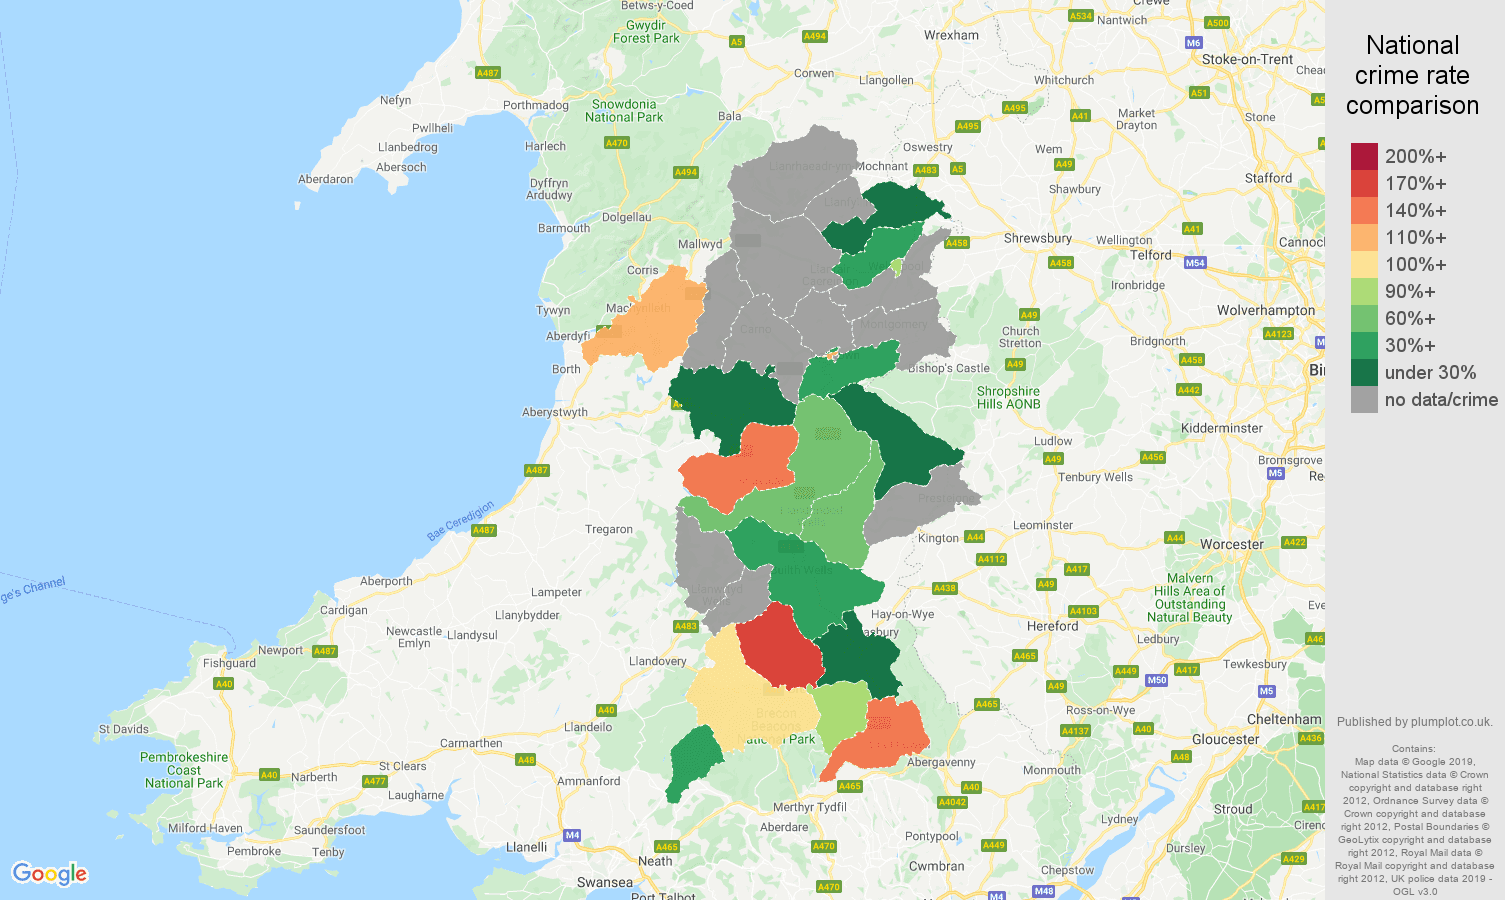 Powys possession of weapons crime rate comparison map